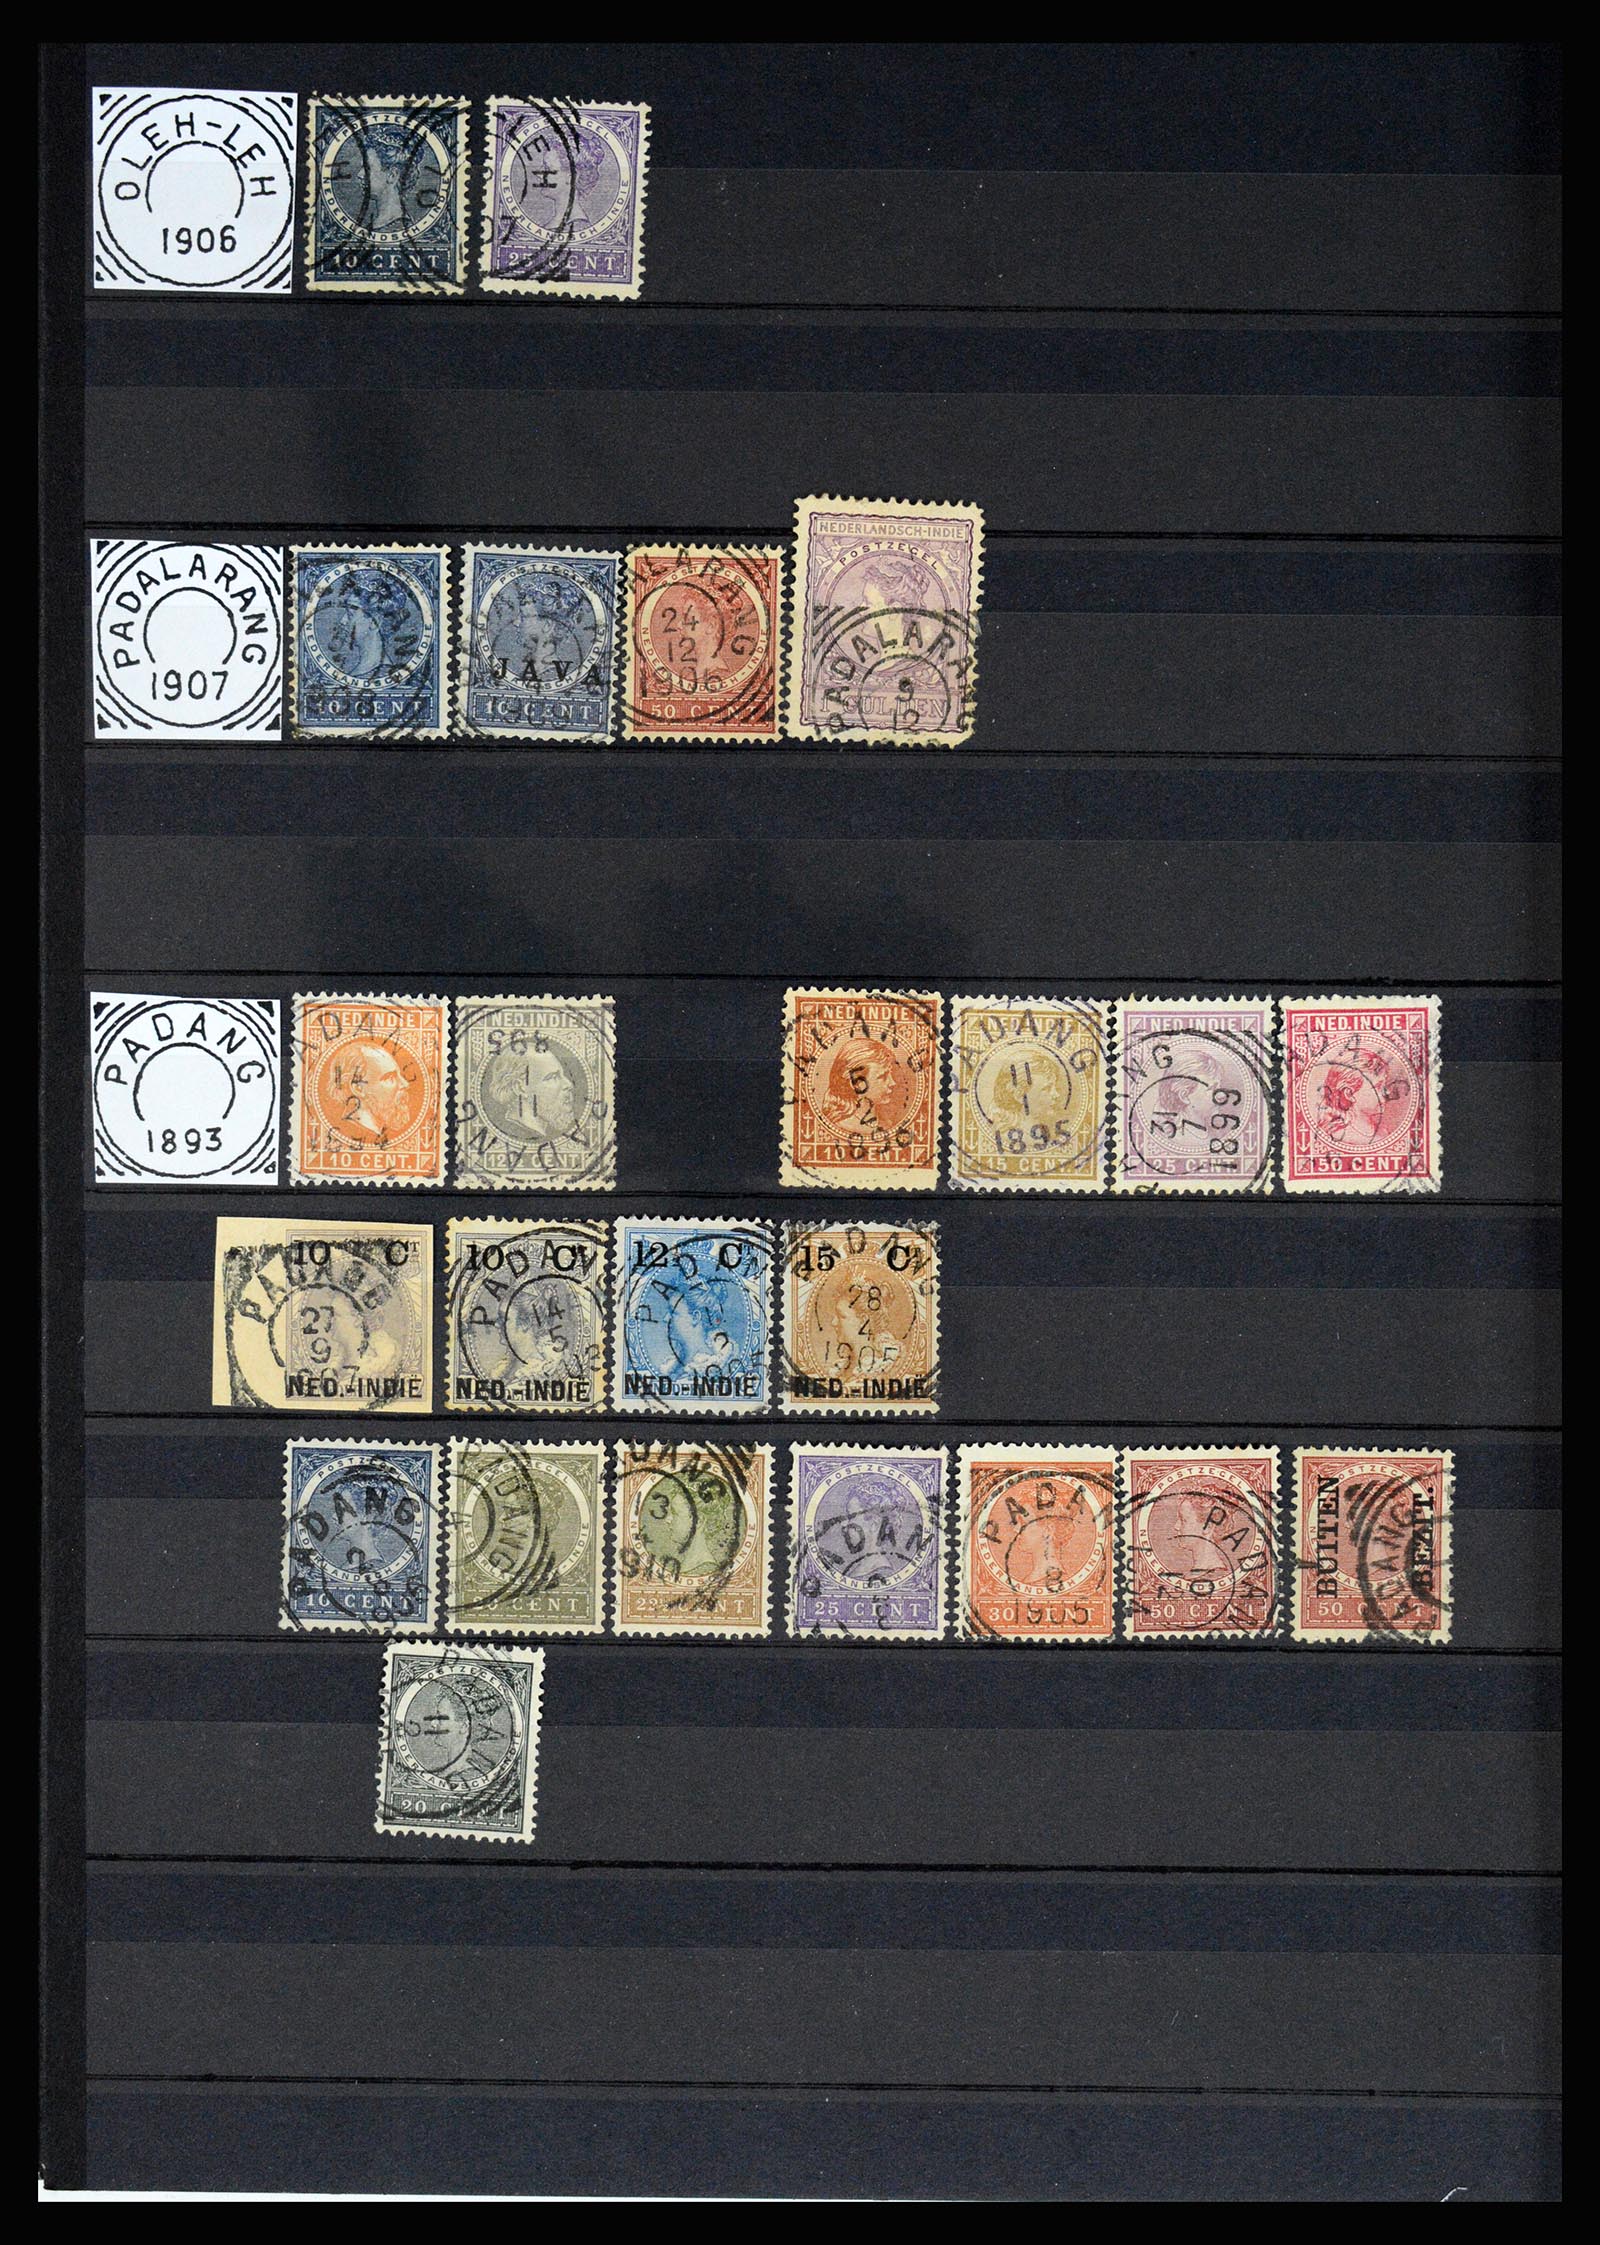 36839 033 - Stamp collection 36839 Dutch east Indies square cancels.